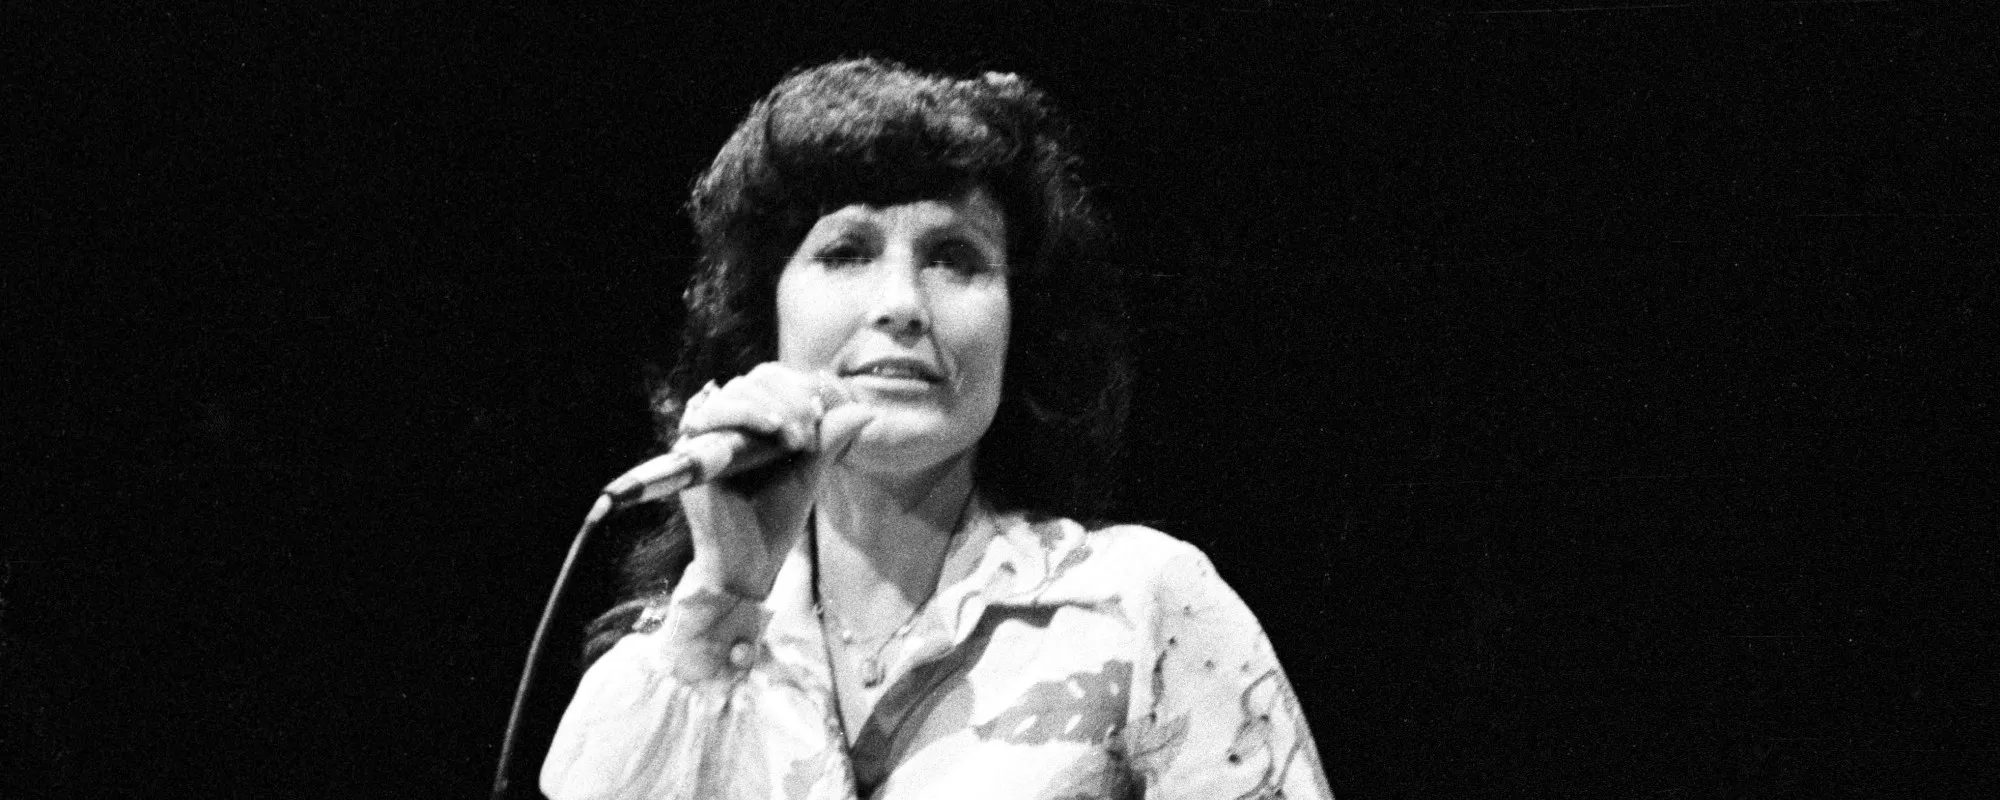 5 Loretta Lynn Songs That Were Banned and Still Became Hits